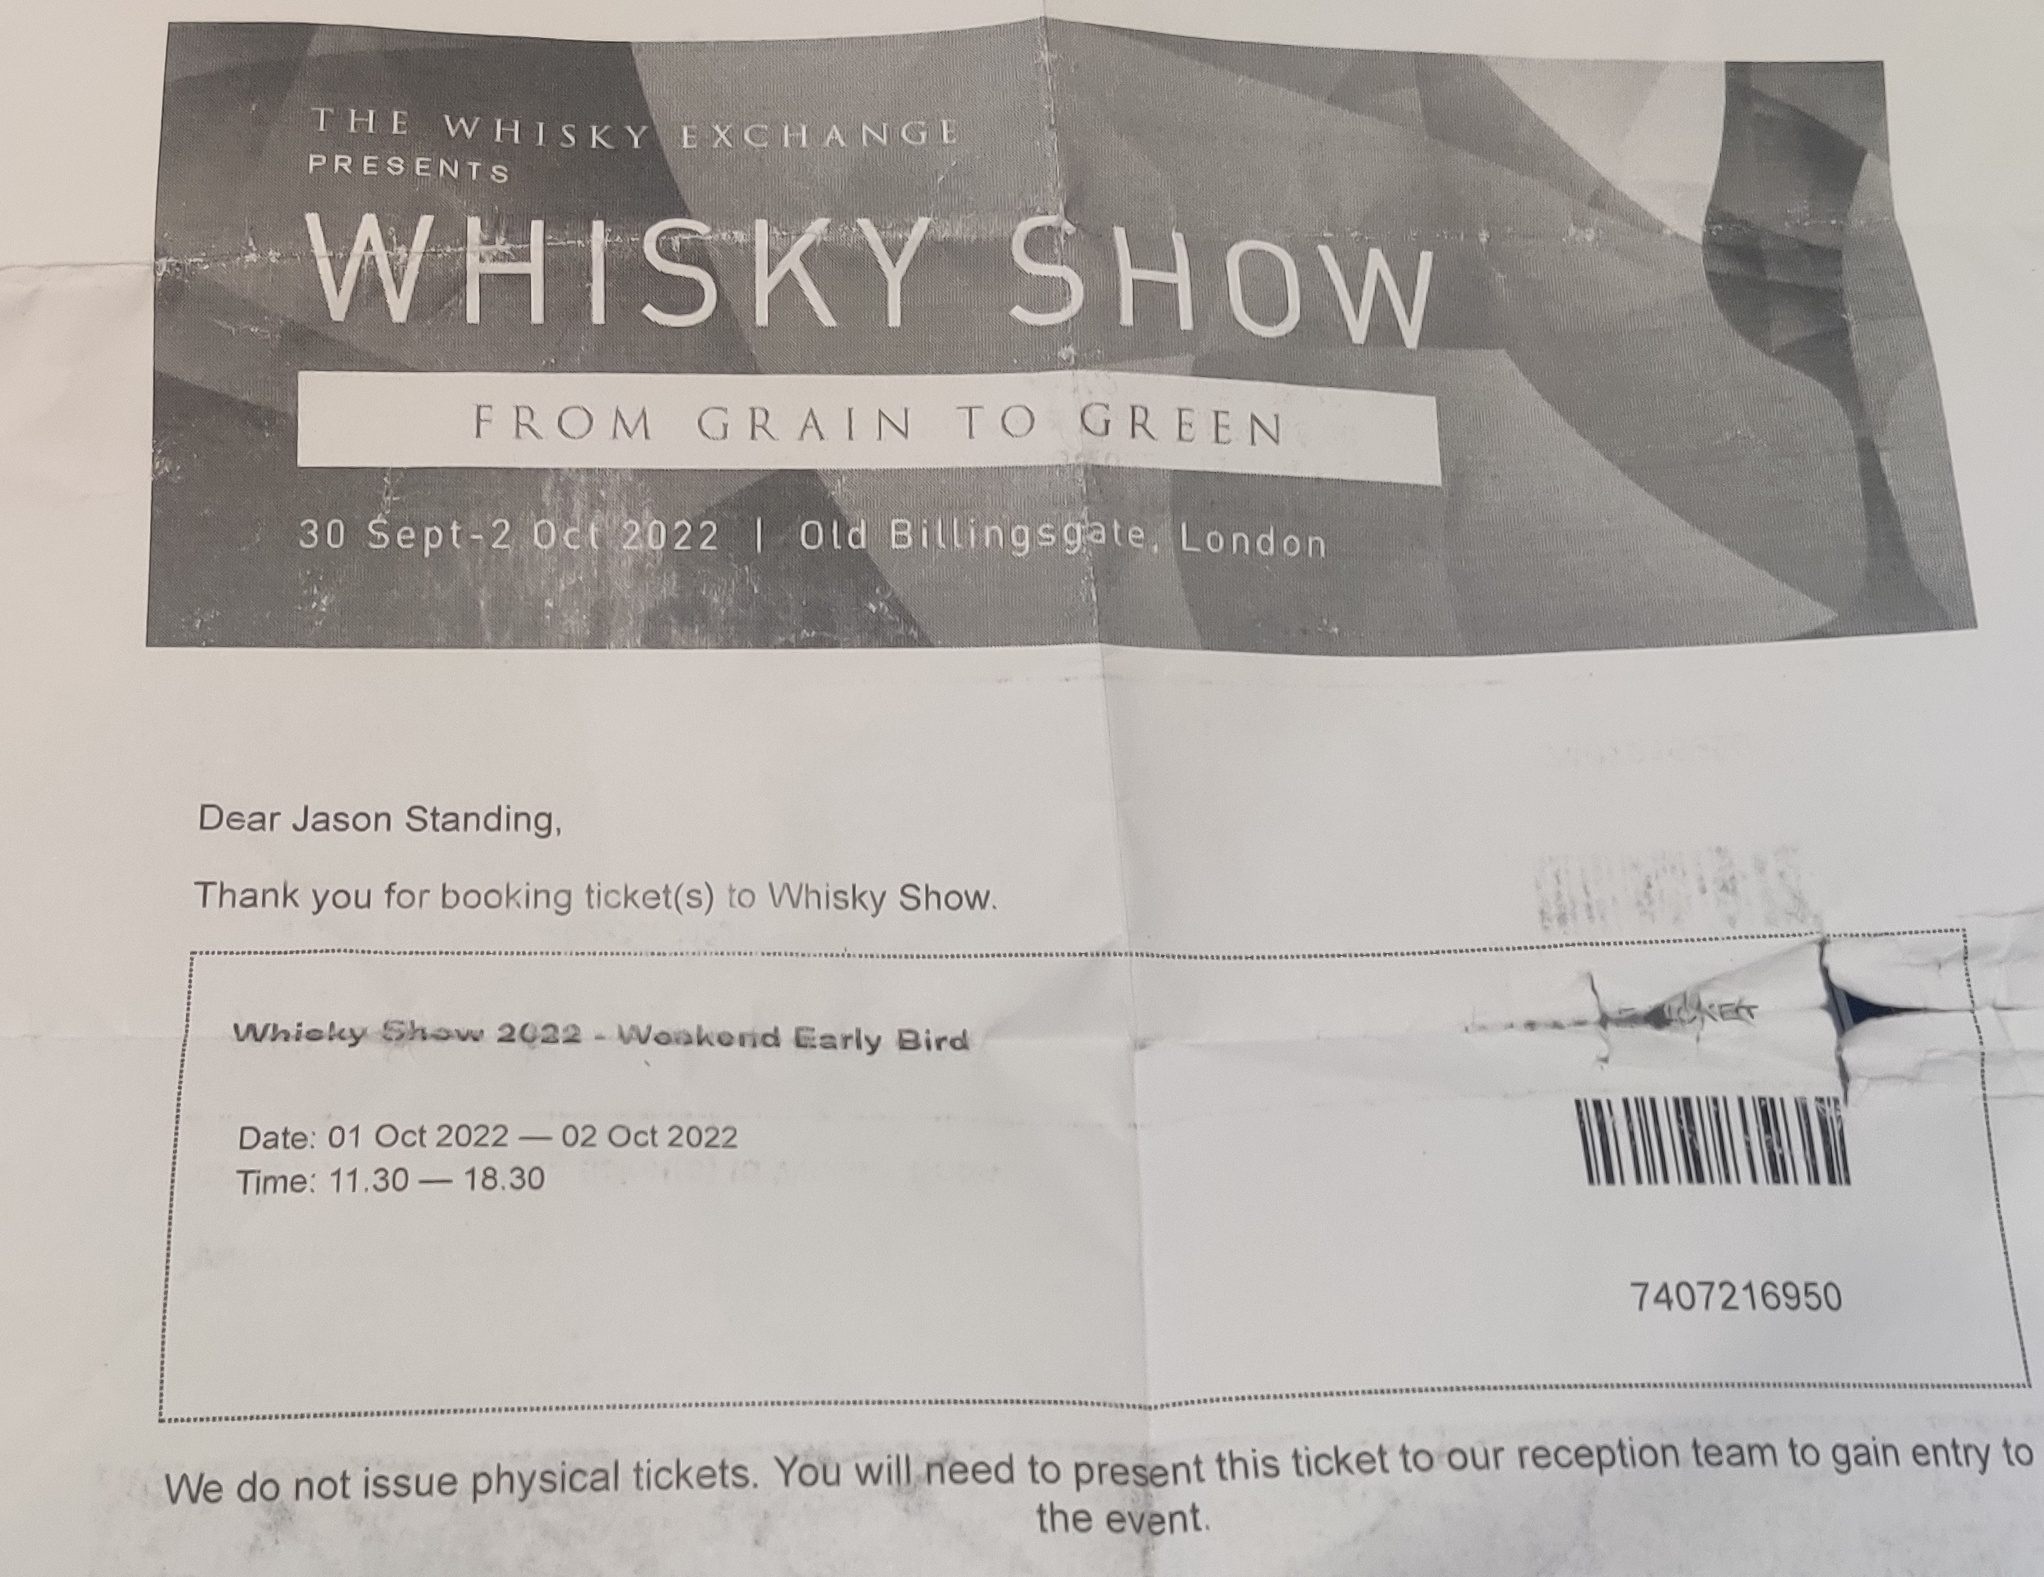 The Whisky Show